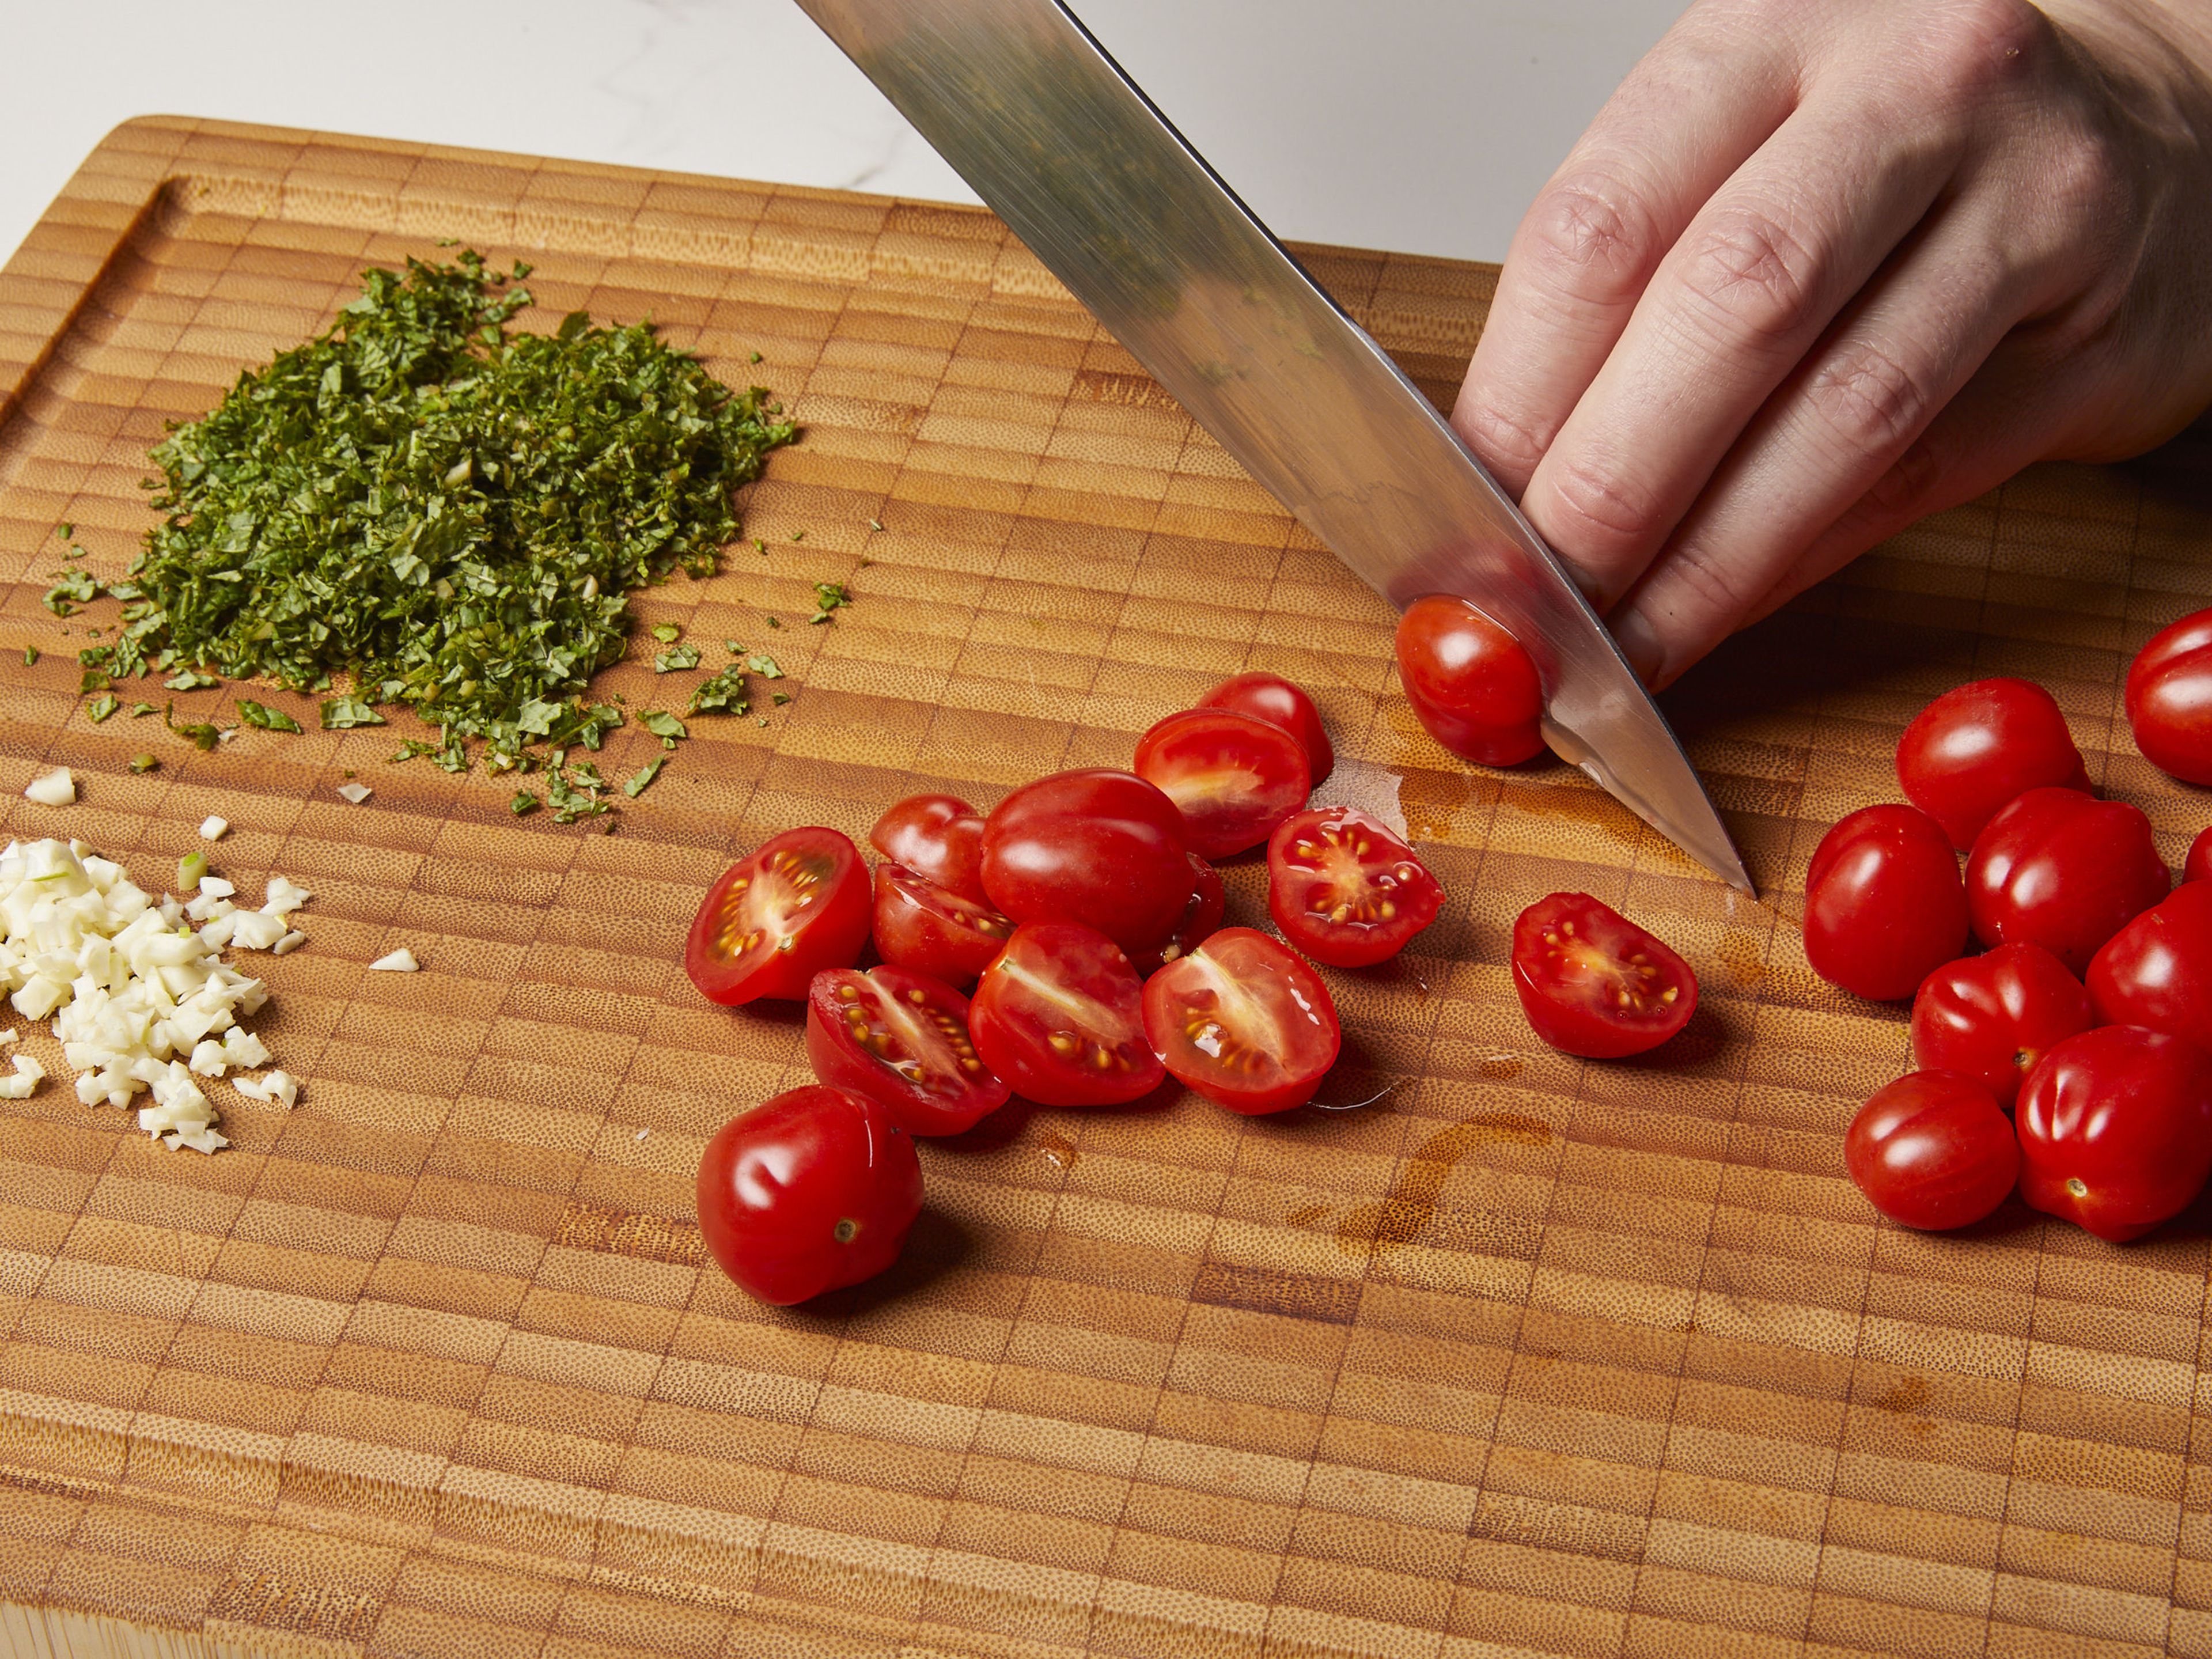 Peel and finely chop garlic. Then halve cherry tomatoes and finely chop mint. Wash lemon and finely grate 1 tsp of zest, then juice it.